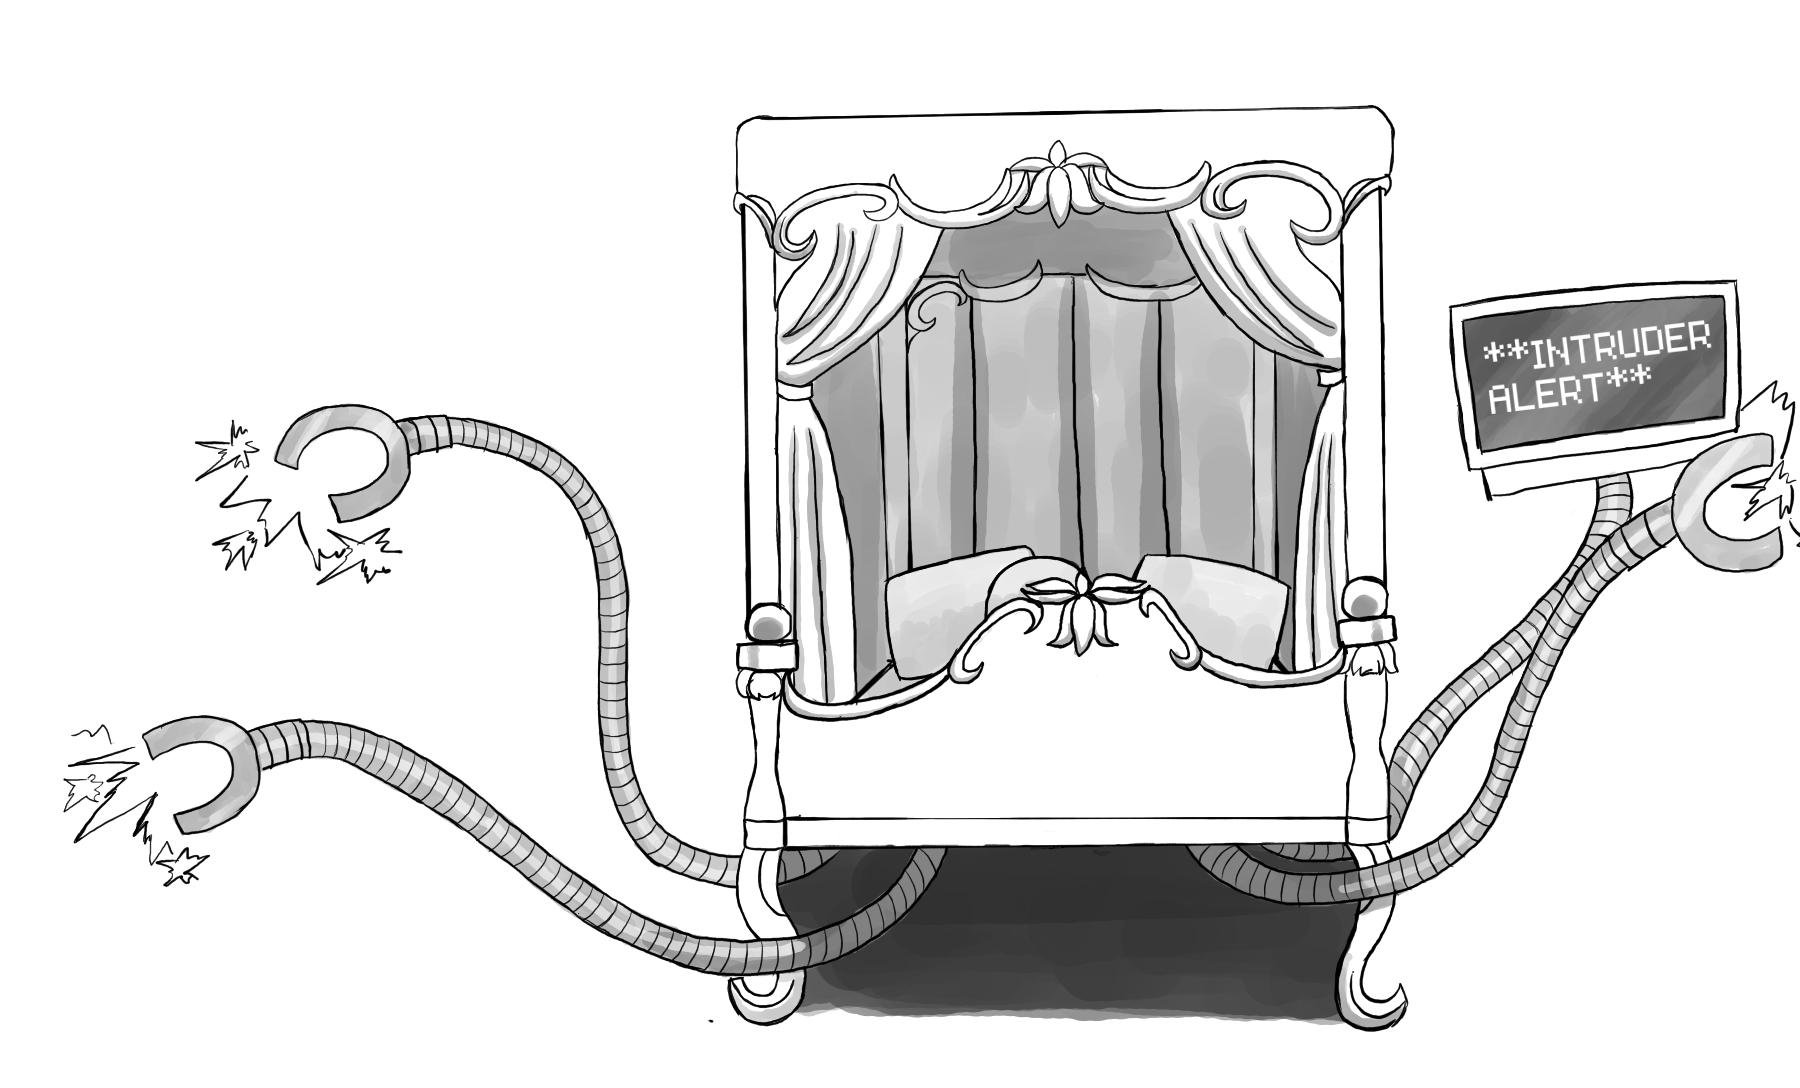 Image description: A rococo style canopy bed with multipel robotic arms extending from underneath it. One of them has a monitor with an intruder alert message and the others have electrified claws.